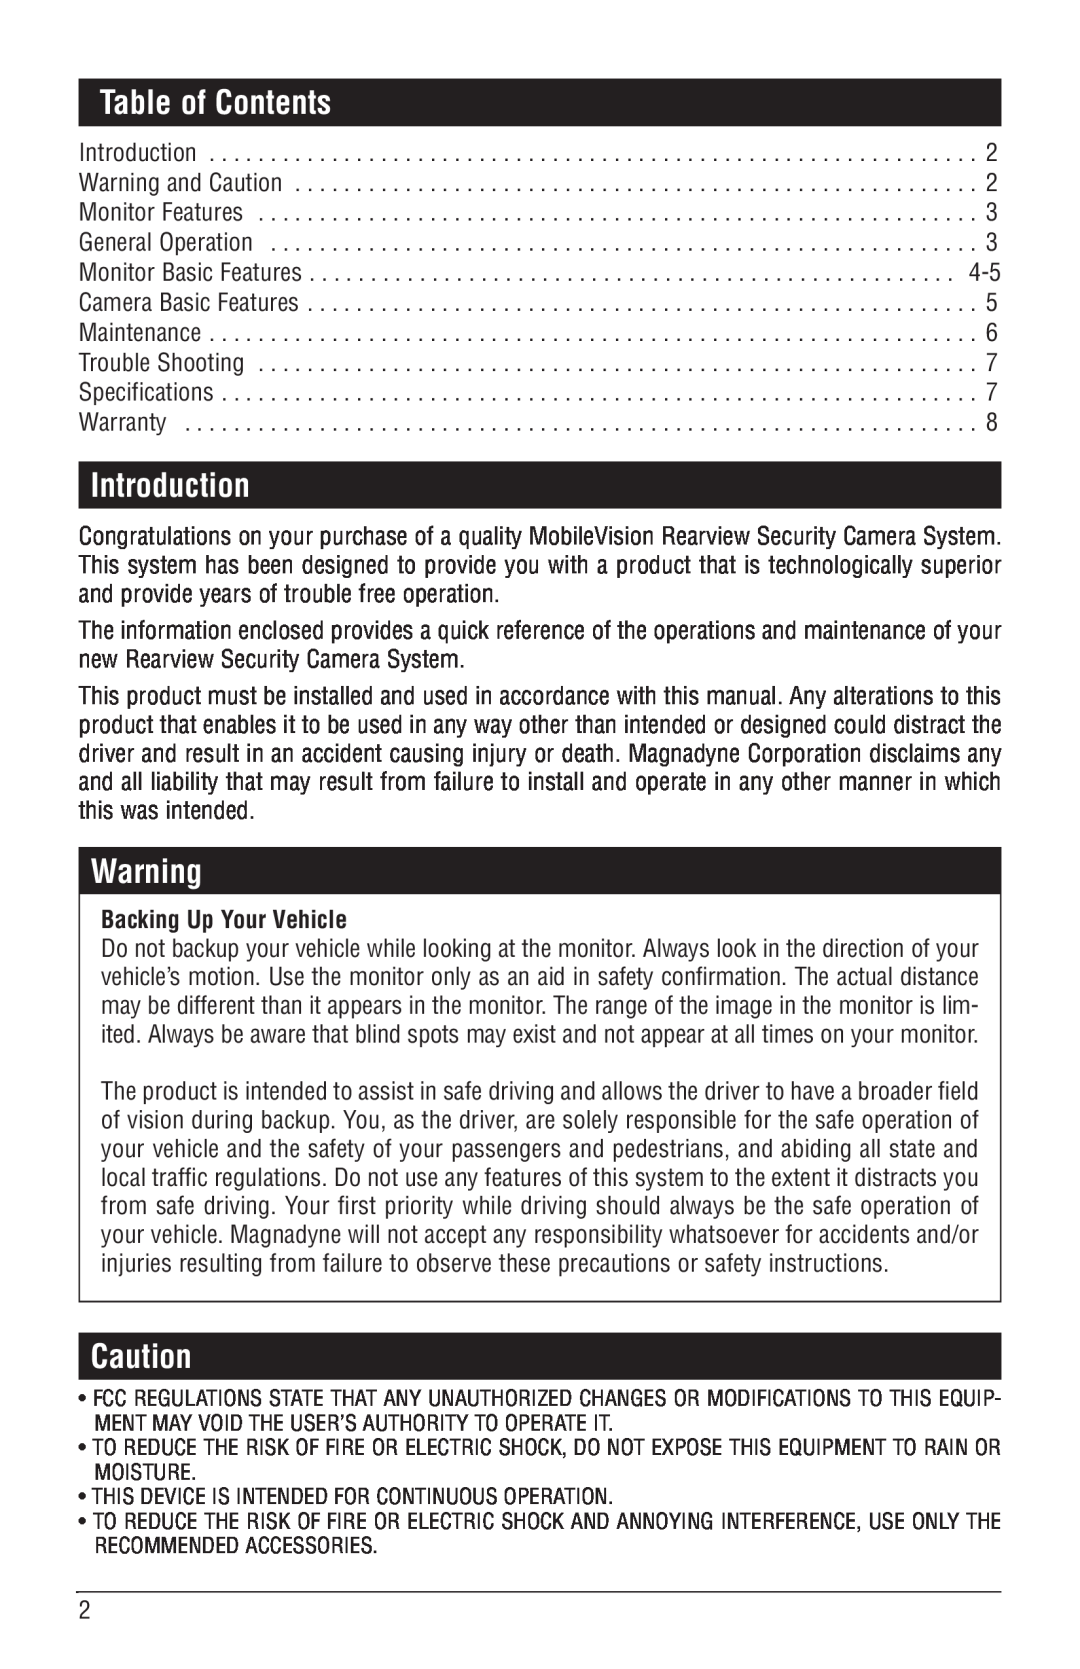 Magnadyne MCS-700BW owner manual Table of Contents, Introduction, Backing Up Your Vehicle 